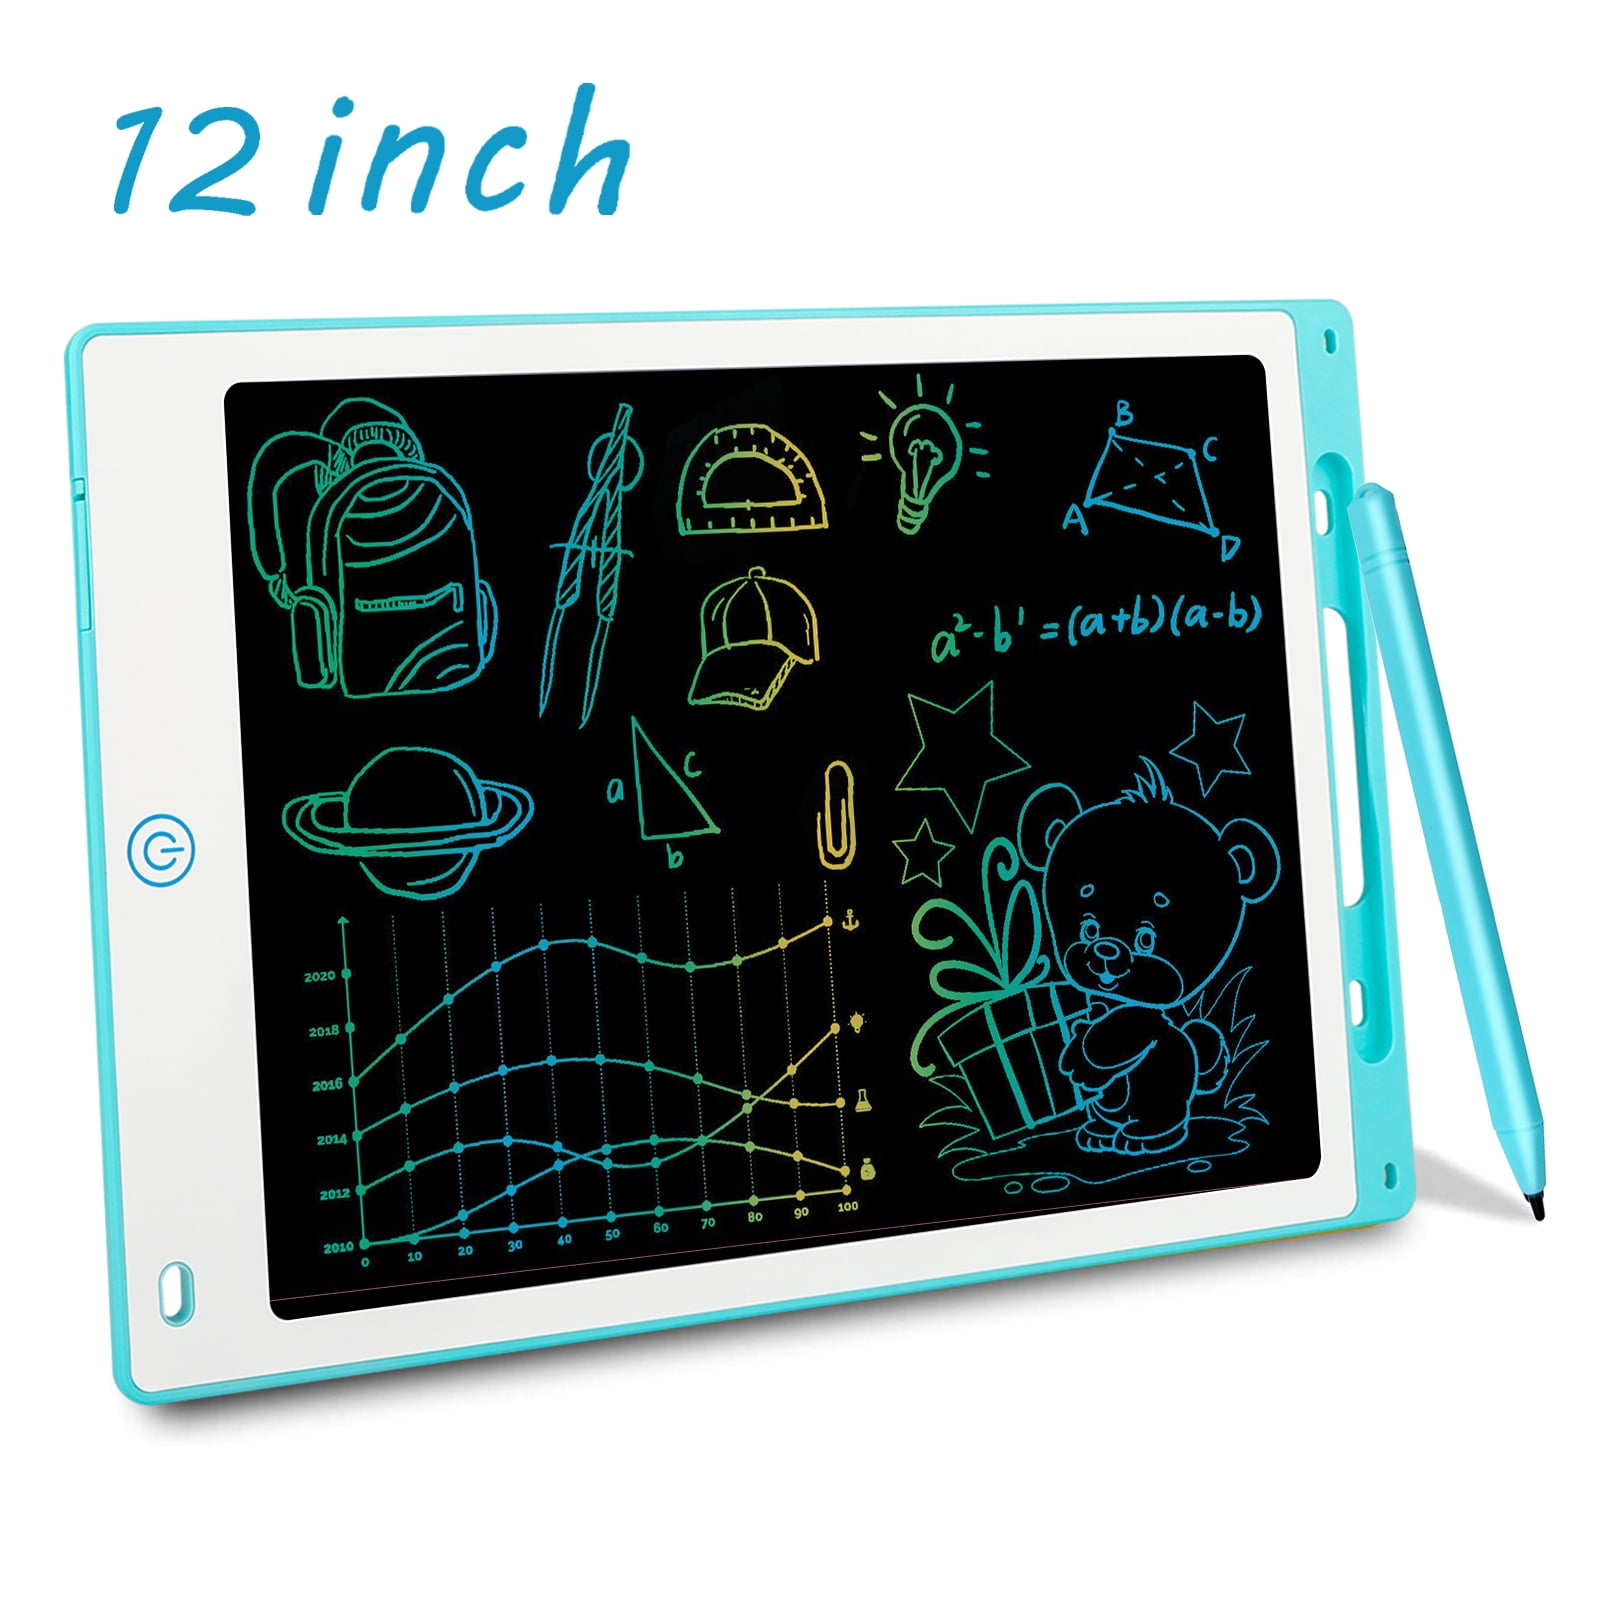 YOUNGRAYS 12 inch LCD Writing Tablet Colourful Digital ewriter Electronic Graphics Tablet Memory Lock Portable Writing Board Handwriting Pad Drawing Tablet for Kids Home School Office Blue）